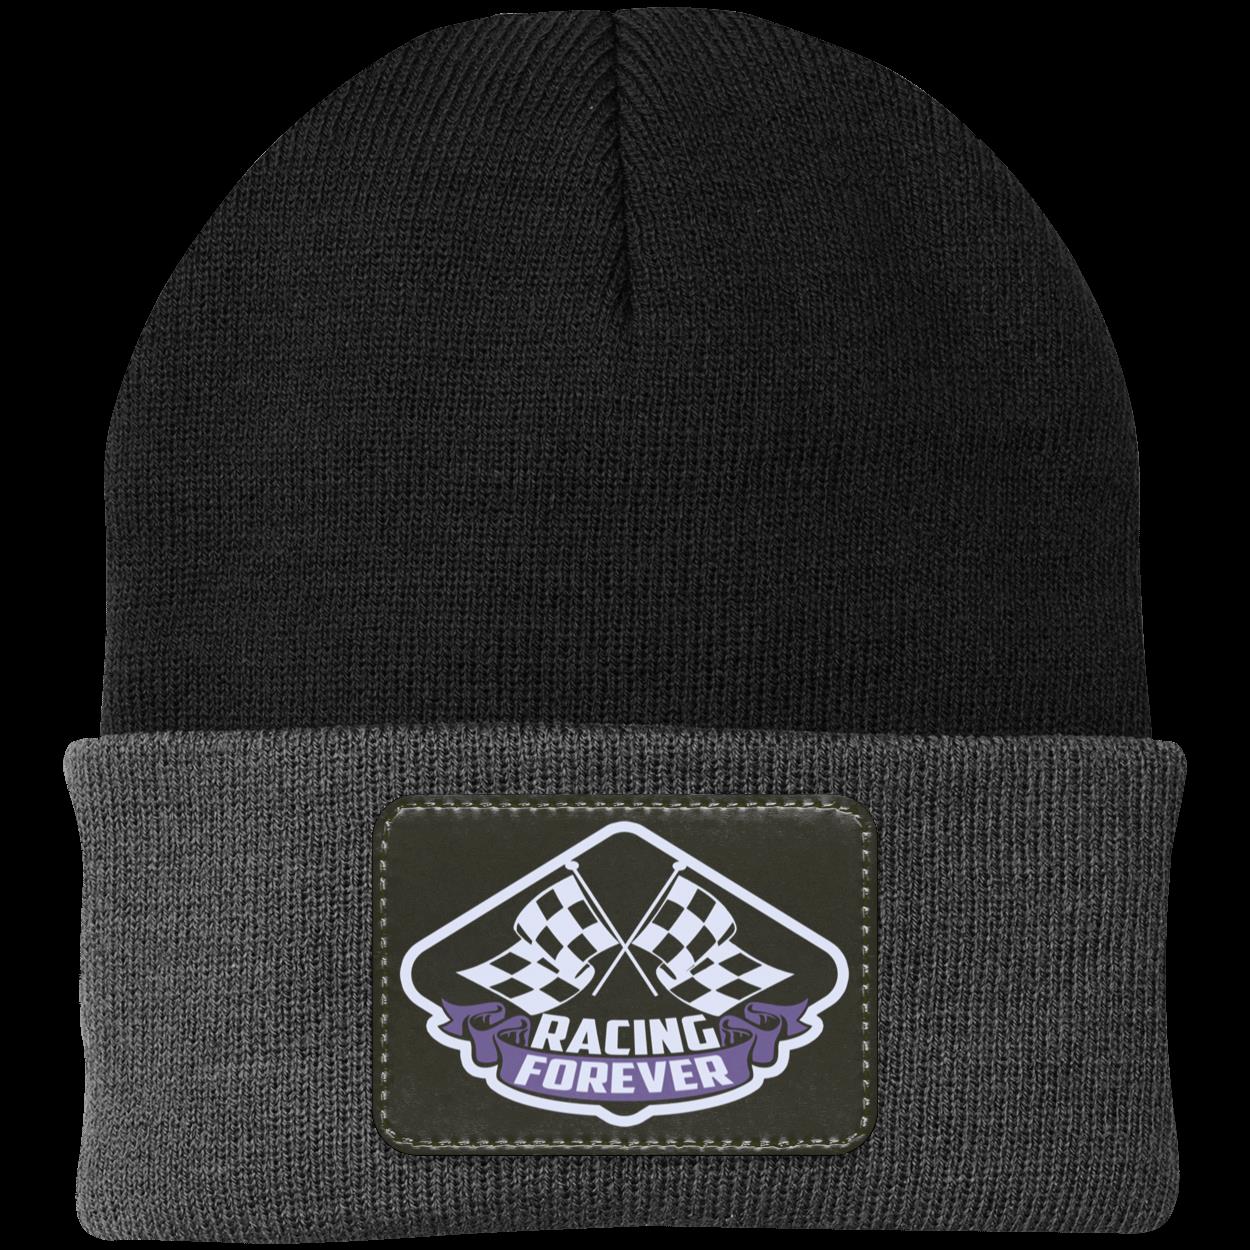 Racing Forever Patched Knit Cap V5